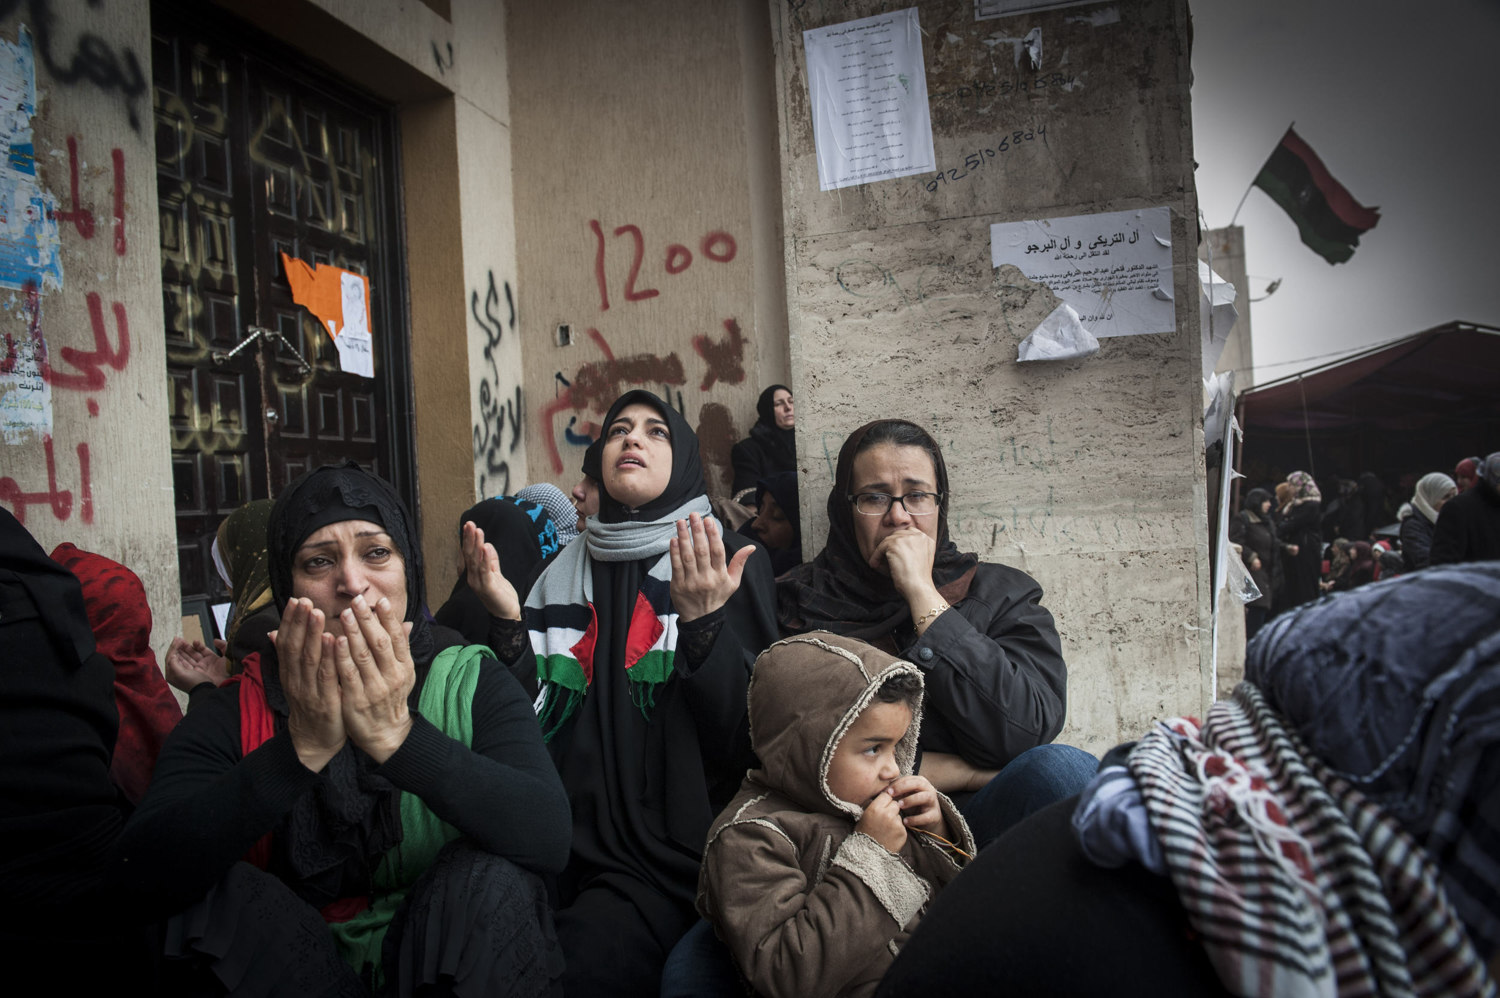  Women cry while mourning their relatives during Friday Prayers in front of  Benghazi's downtown courthouse, men and women pray for safety and for the end of Gaddafi's reign. After a violent battle, the resistance members in Benghazi overtook city an